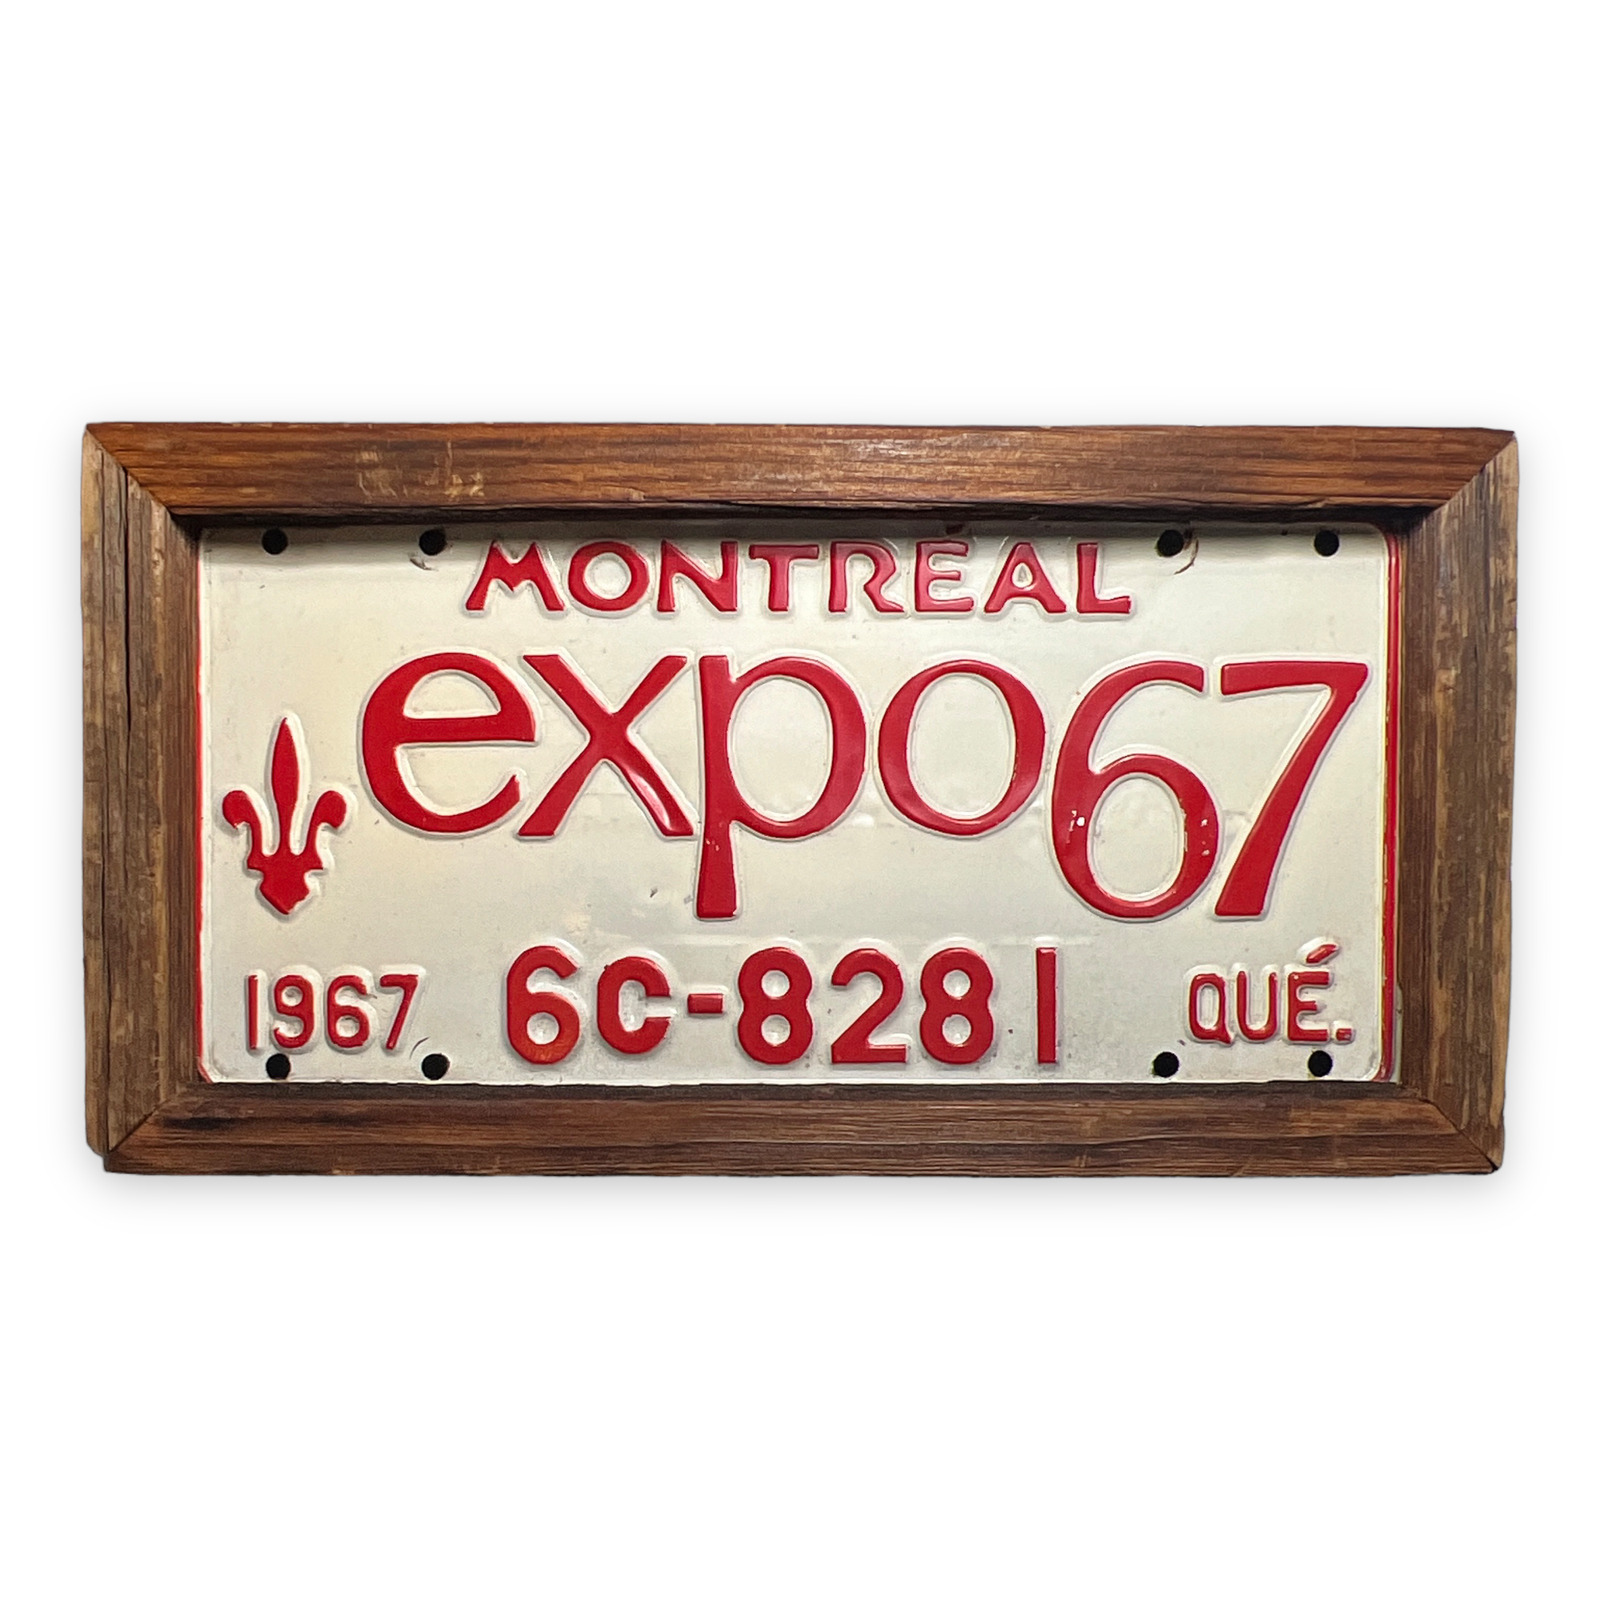 1967 EXPO 67 Montreal Canada Original Vintage License Plate Wood Frame 6C-8281